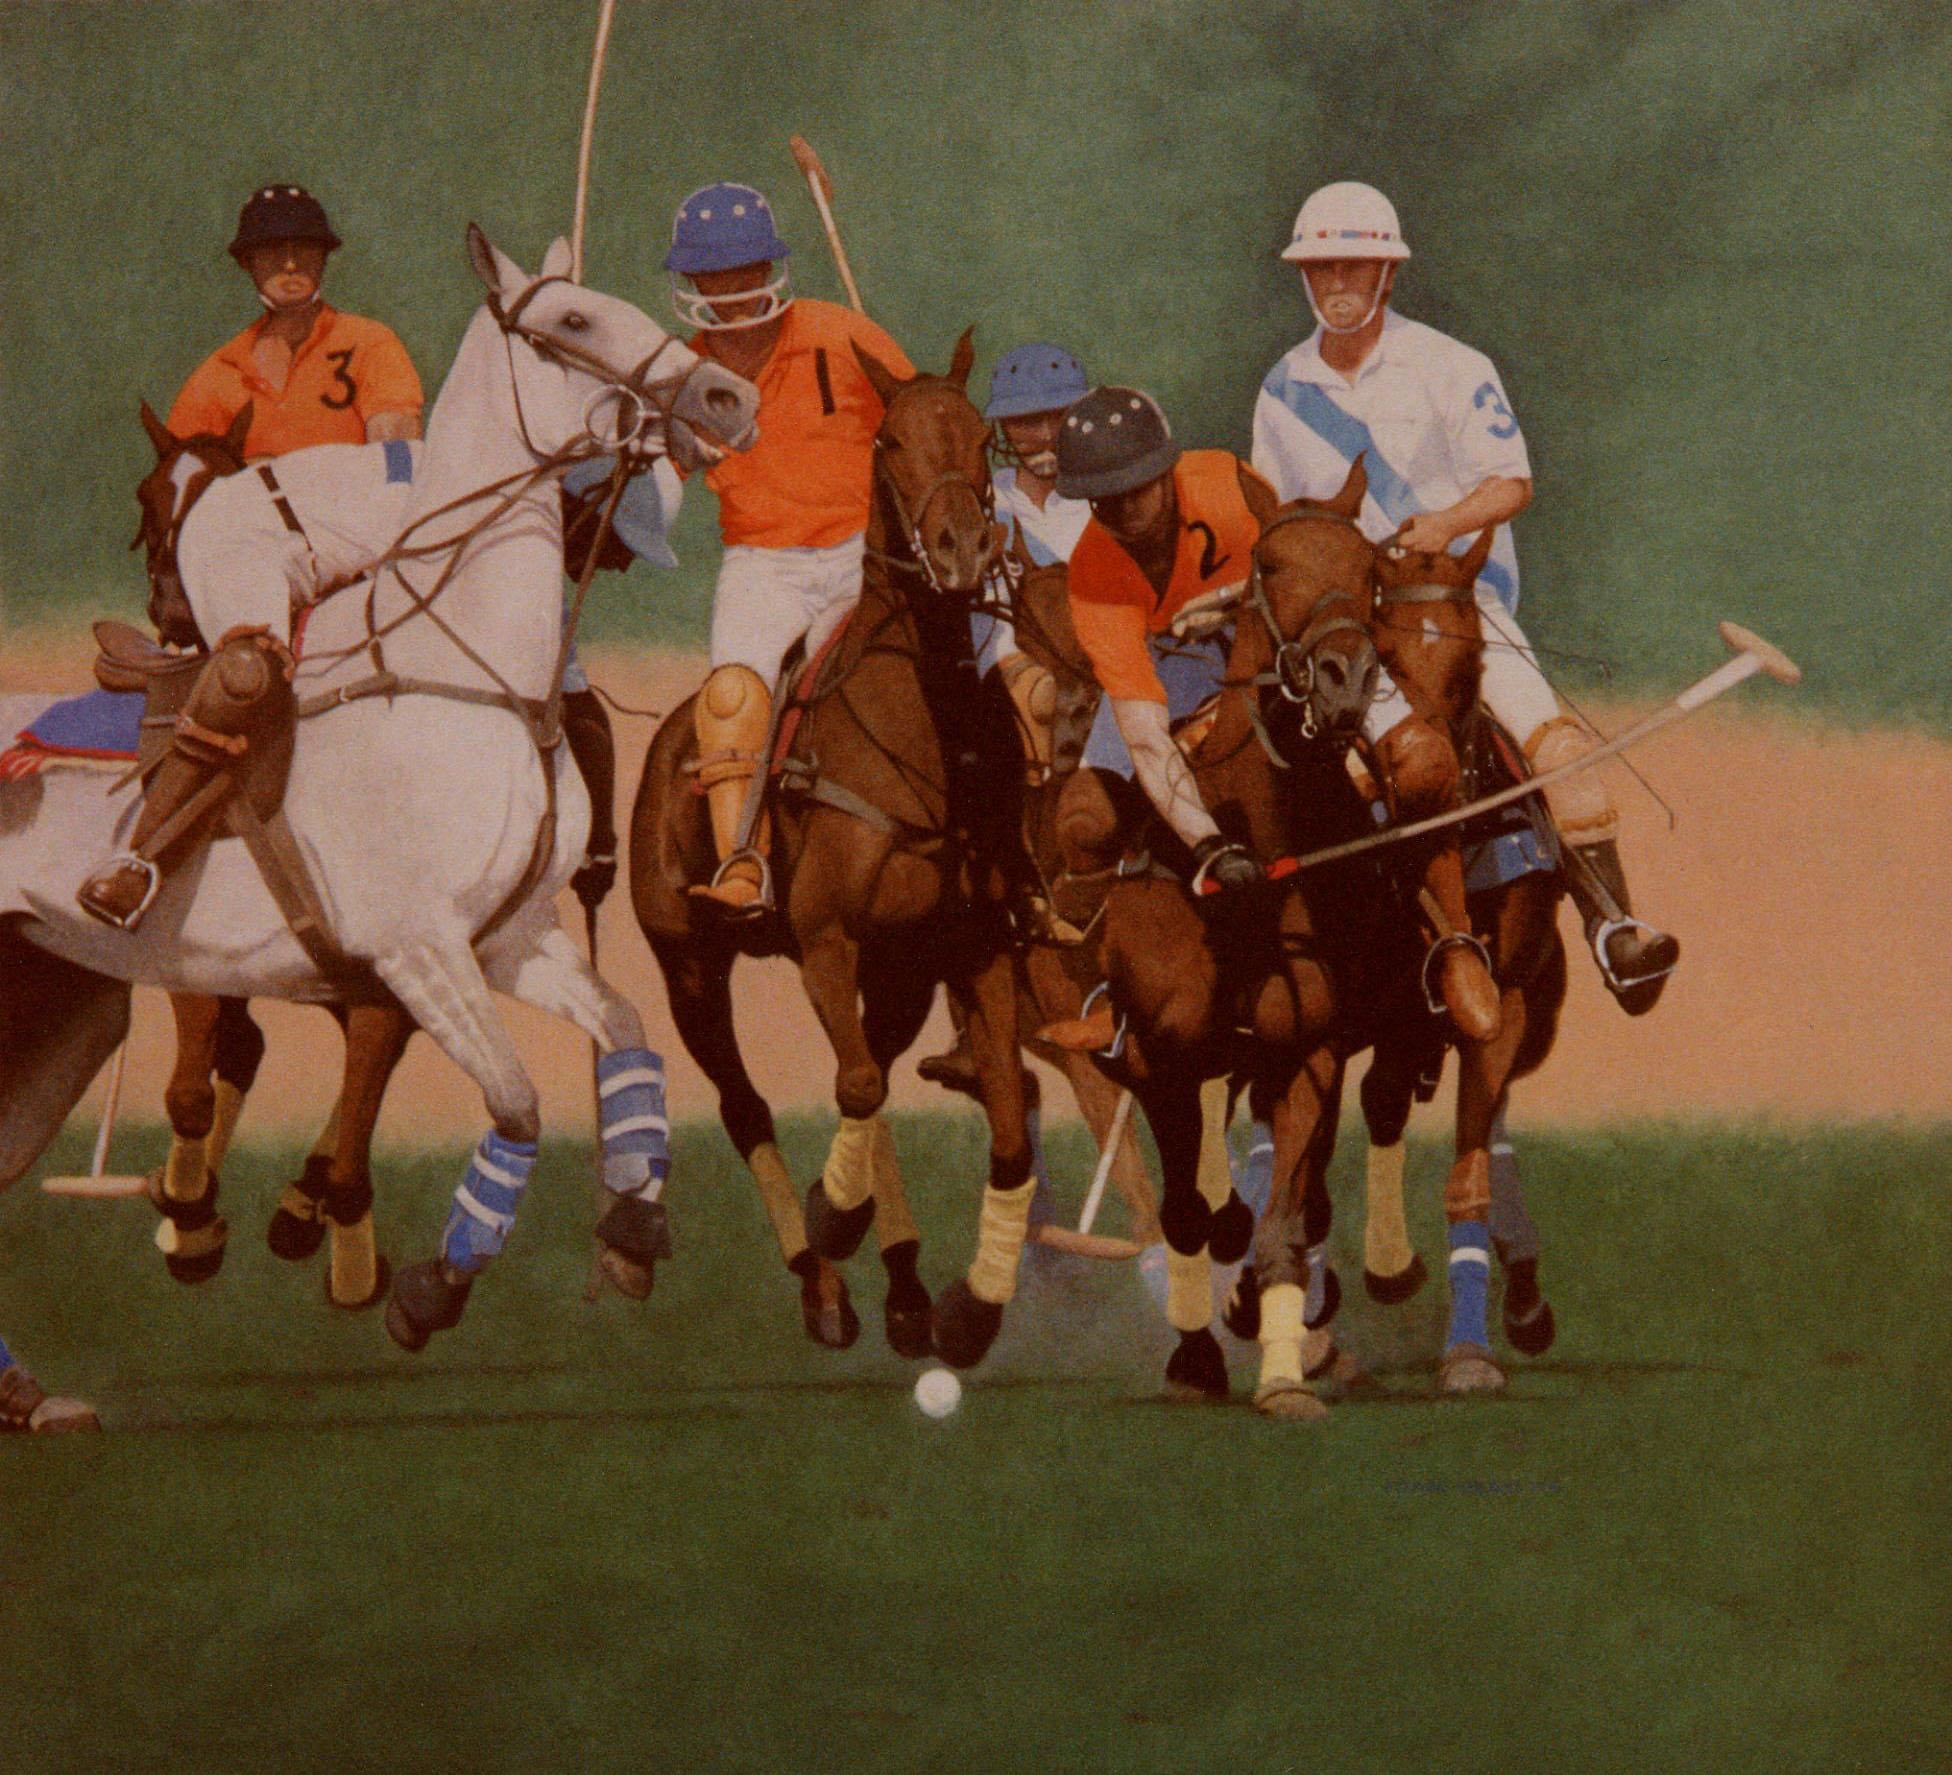 Steve Greaves - The Polo Match - photorealism sport oil painting